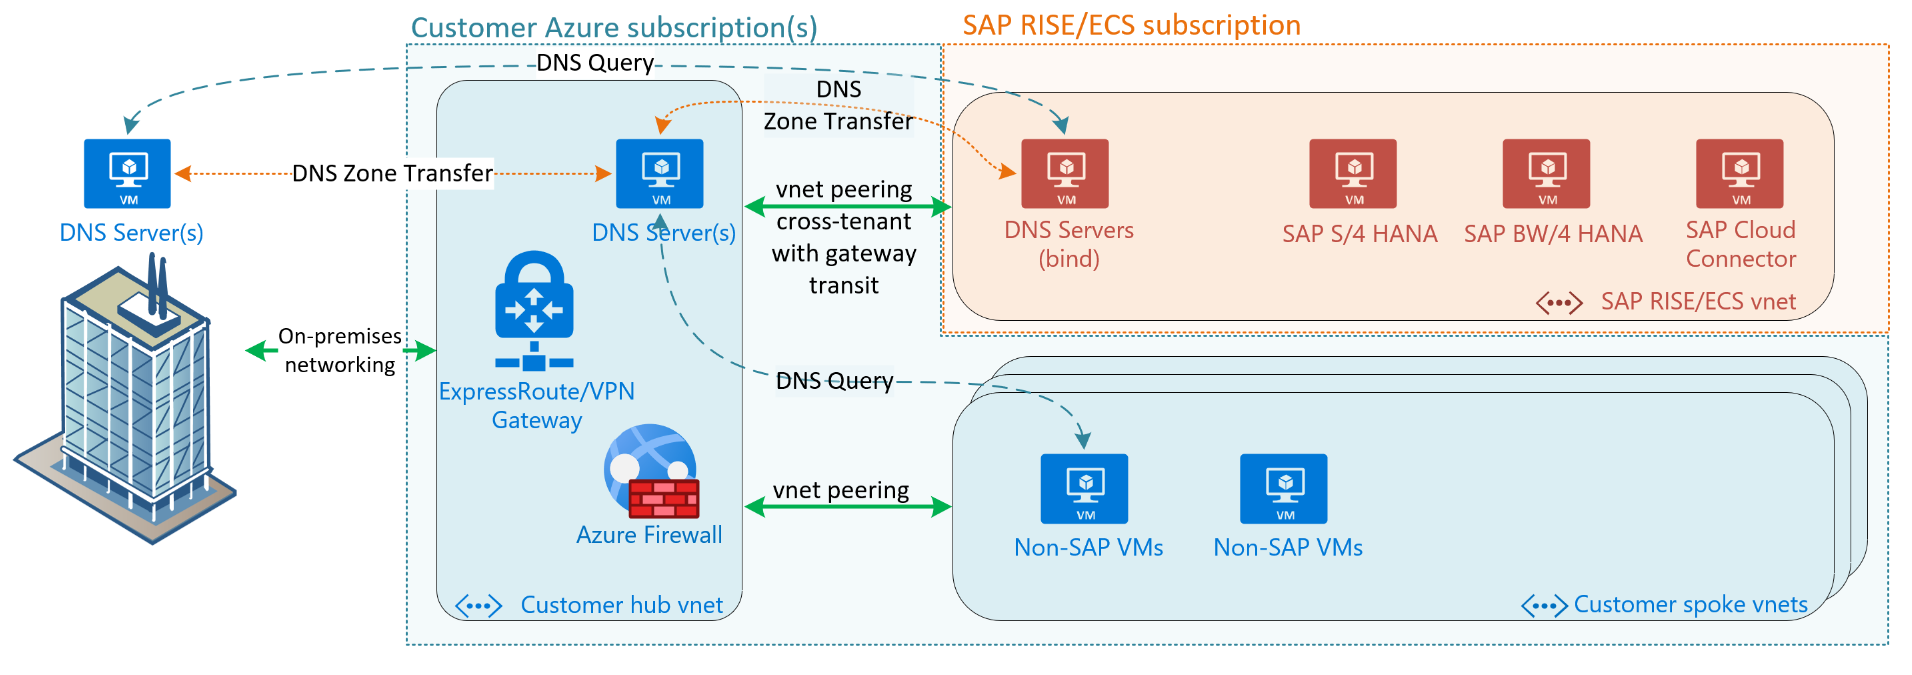 Diagram shows customer DNS servers are located both within customer's hub vnet as well as SAP RISE vnet, with DNS zone transfer between them.